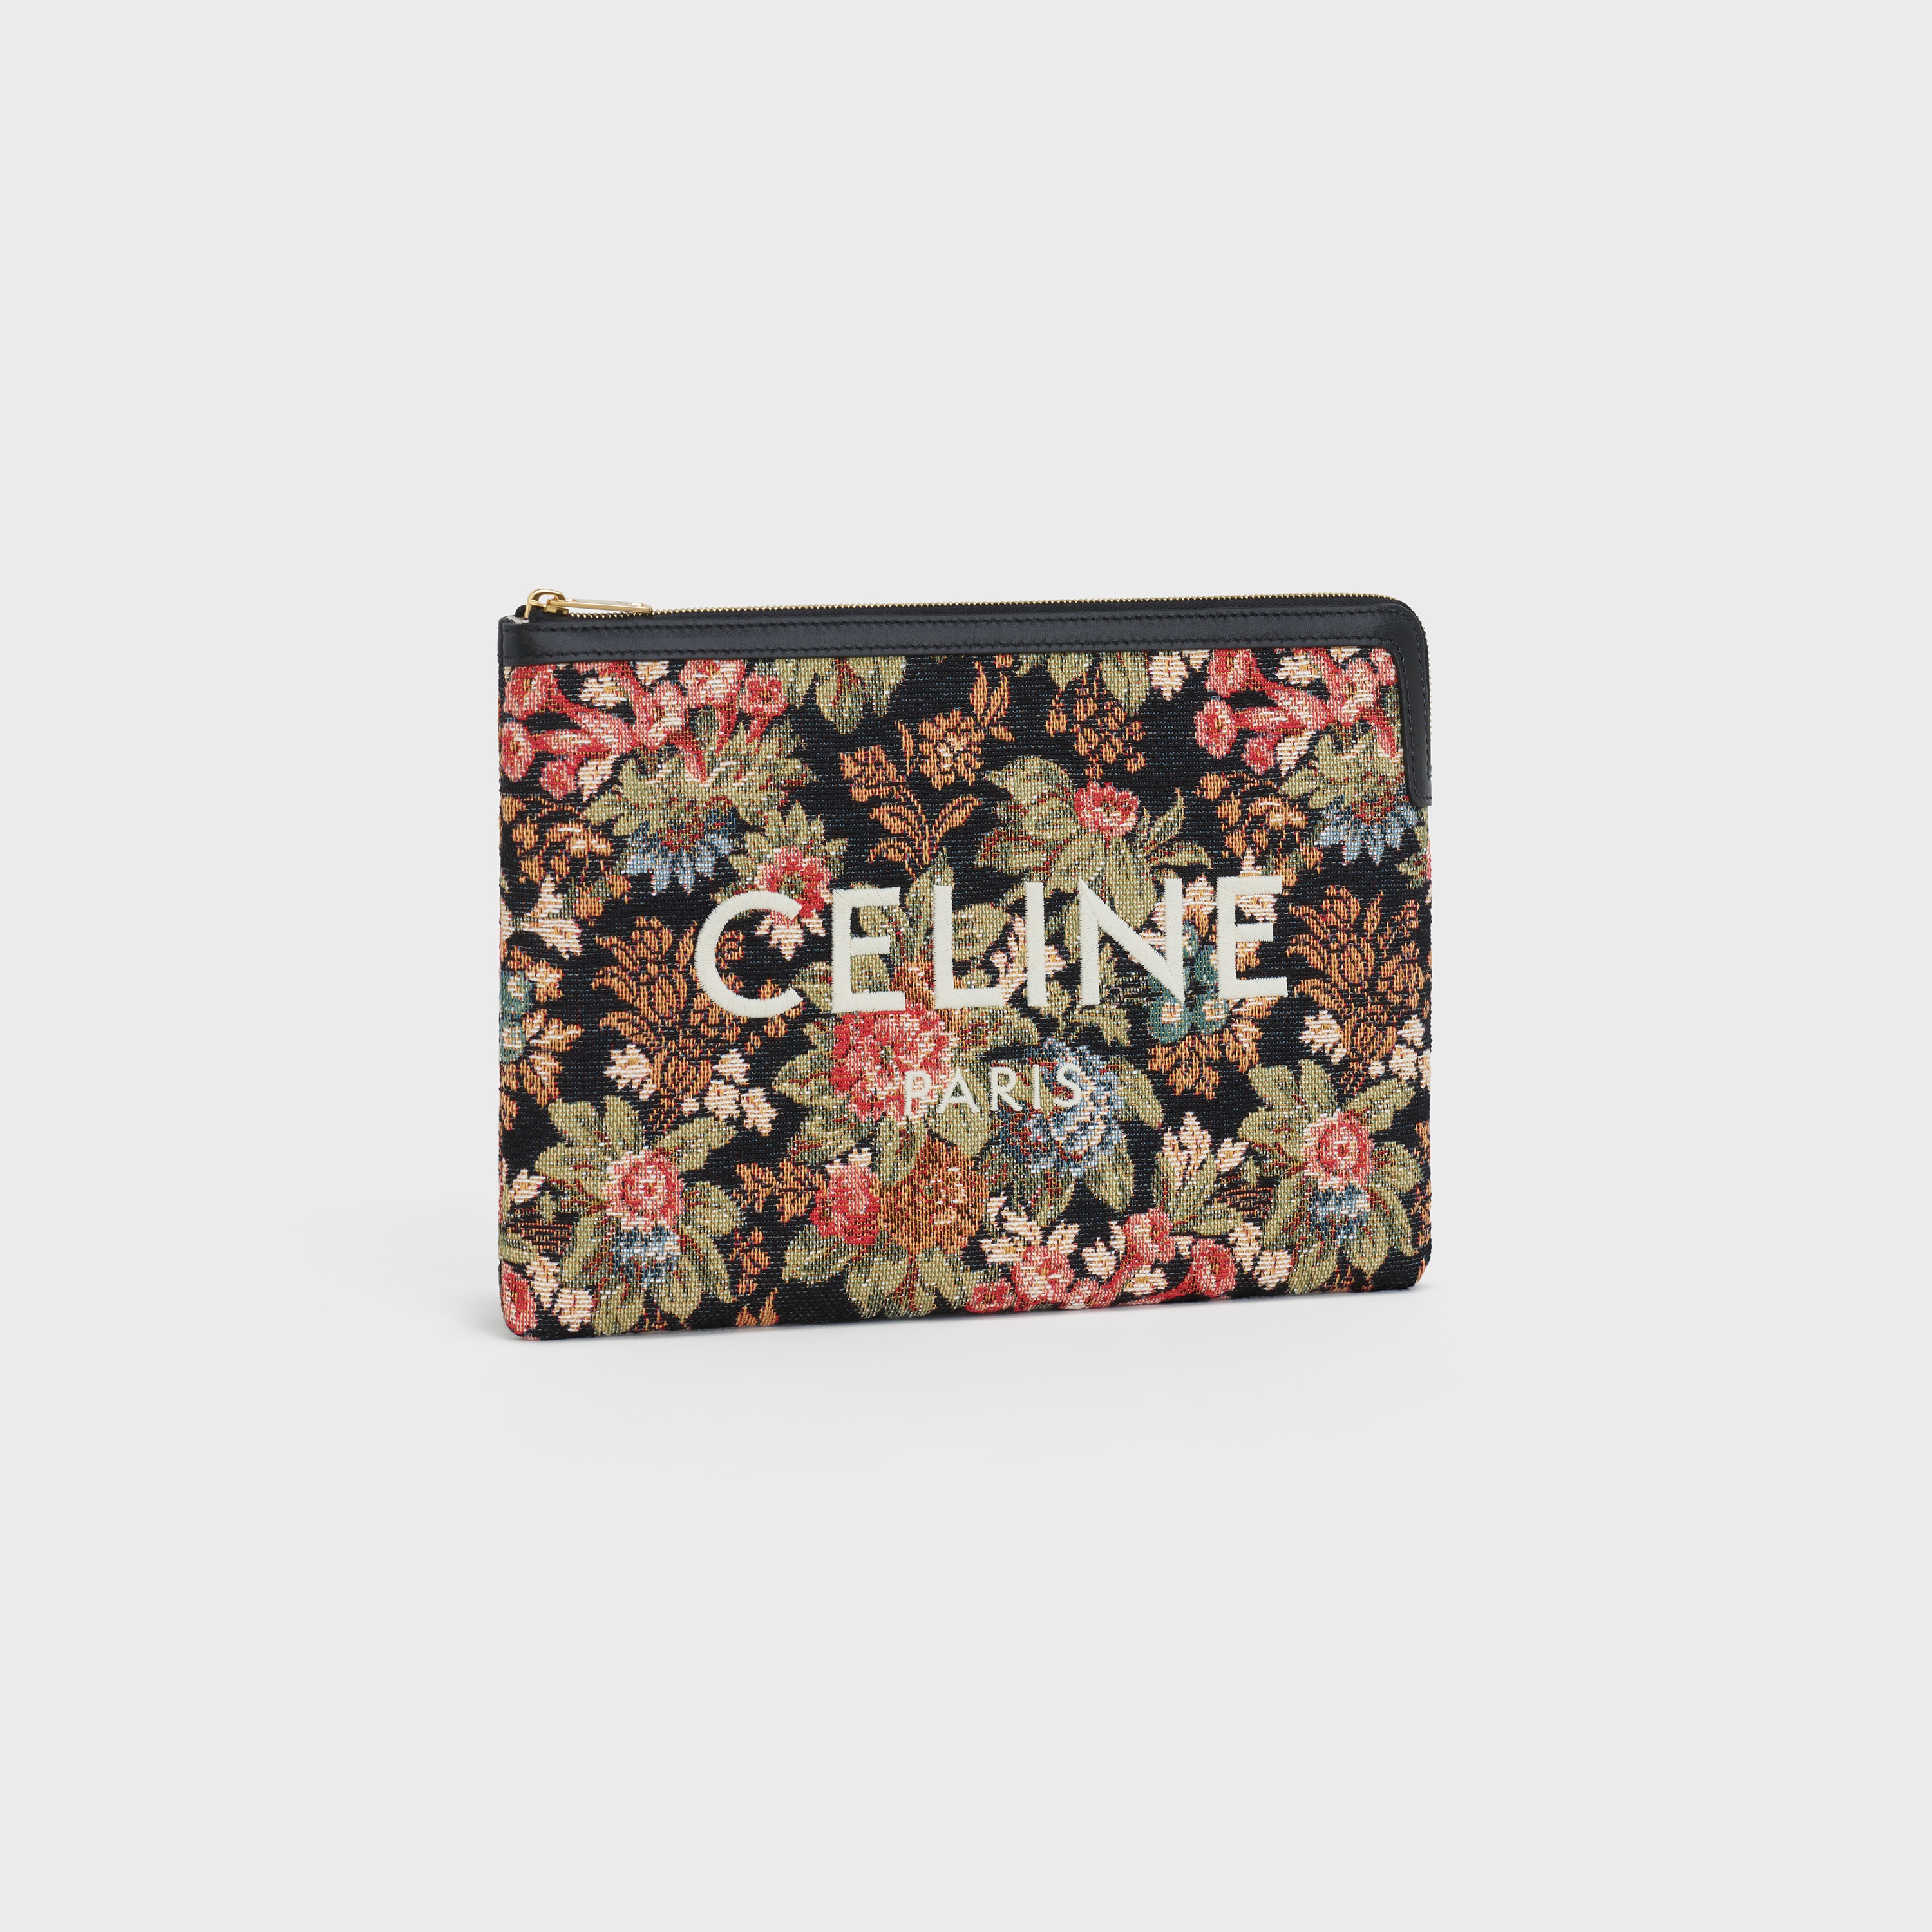 SMALL POUCH  IN  FLORAL JACQUARD WITH CELINE PARIS - 2